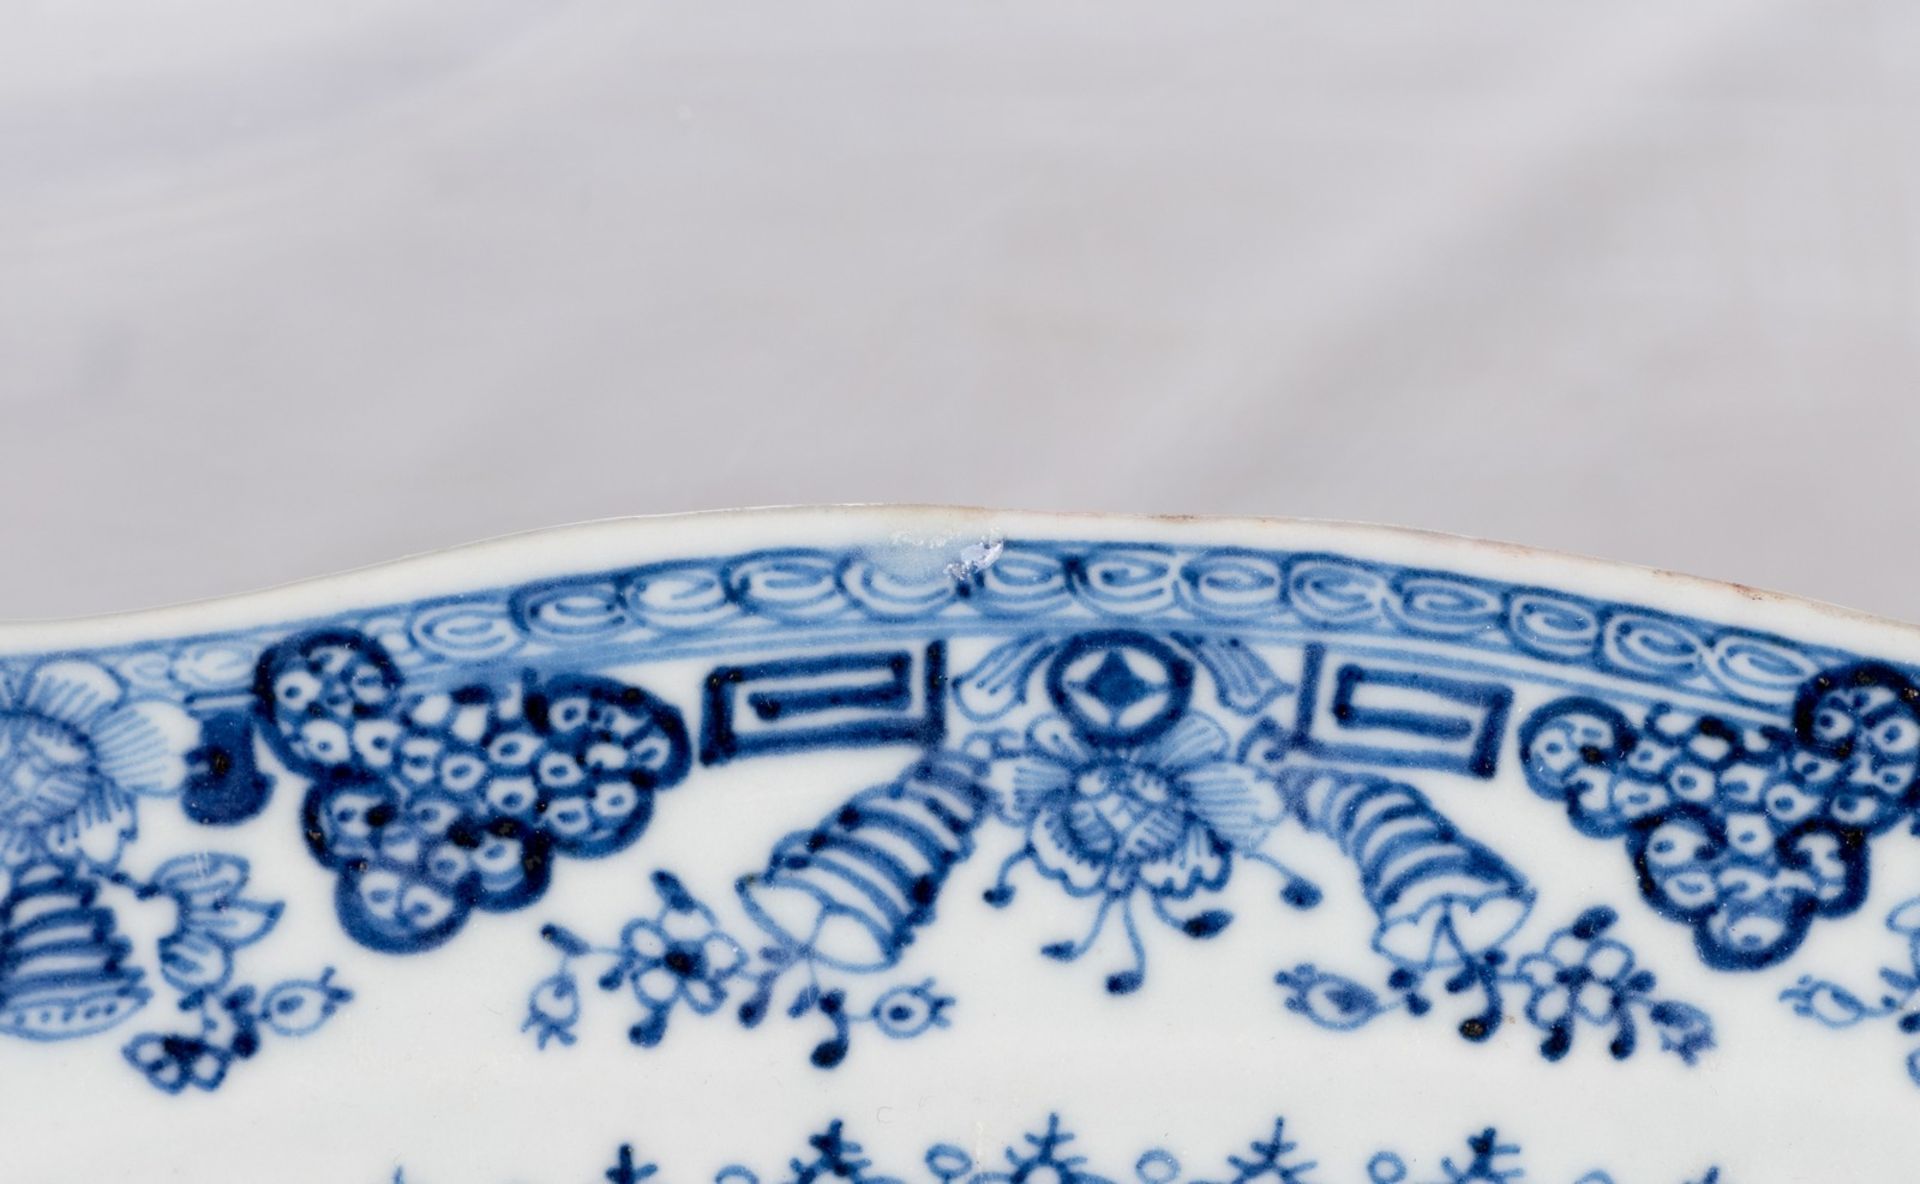 A Chinese blue and white and gilt decorated tureen on a matching plate with floral motives, 18thC; - Image 7 of 16